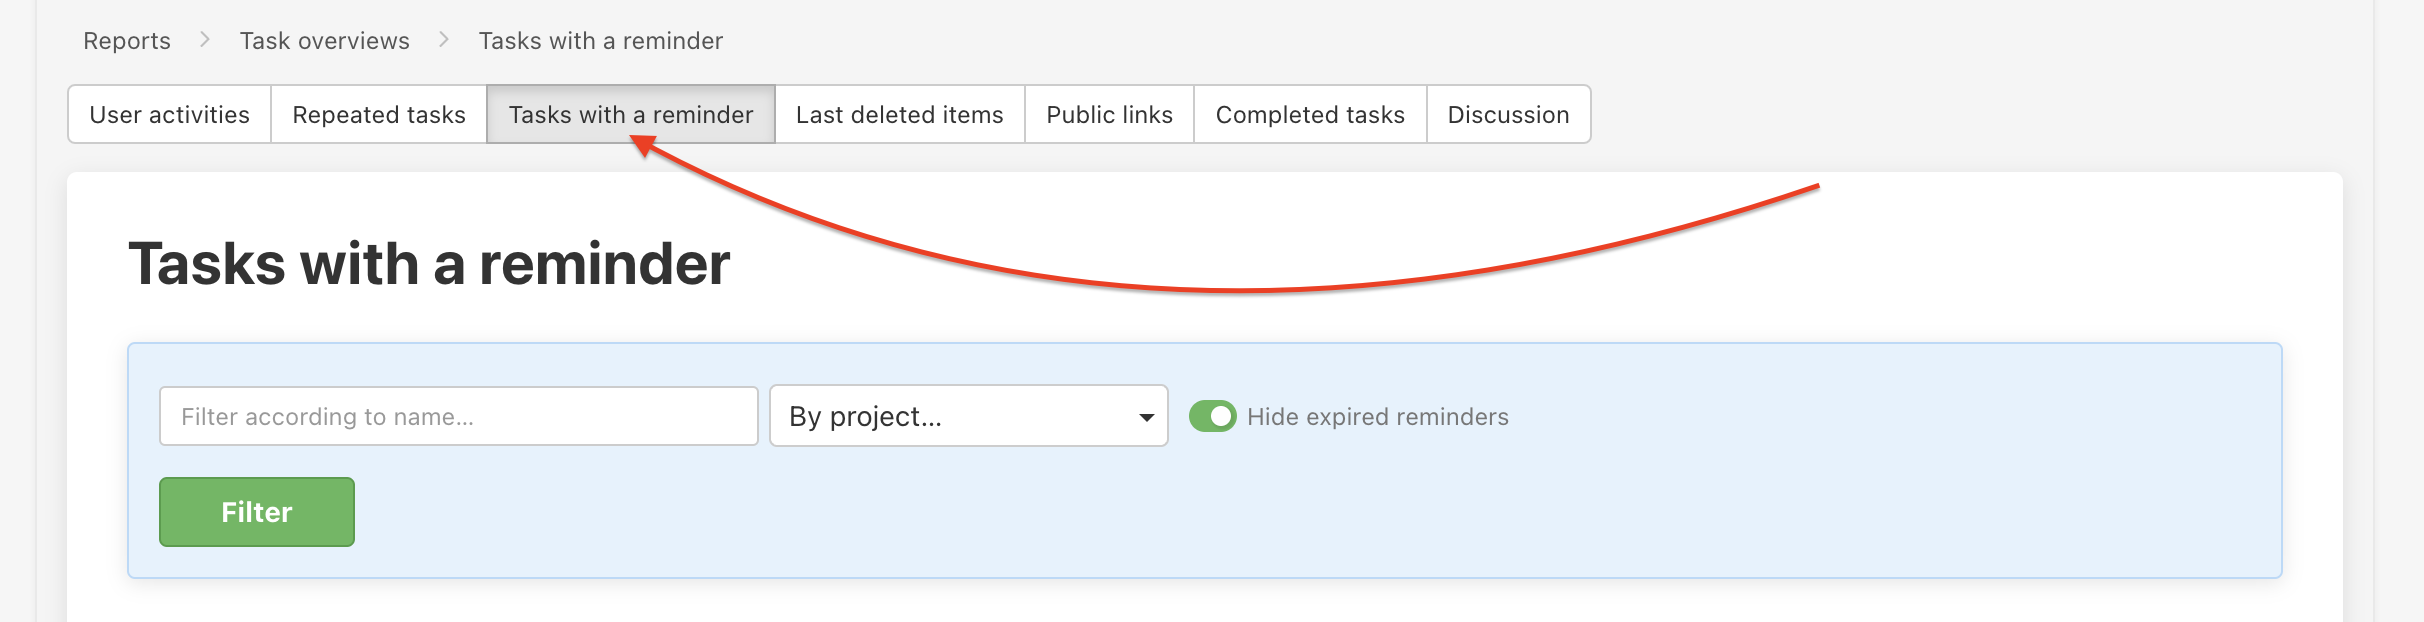 Overview of Tasks with a reminder. 